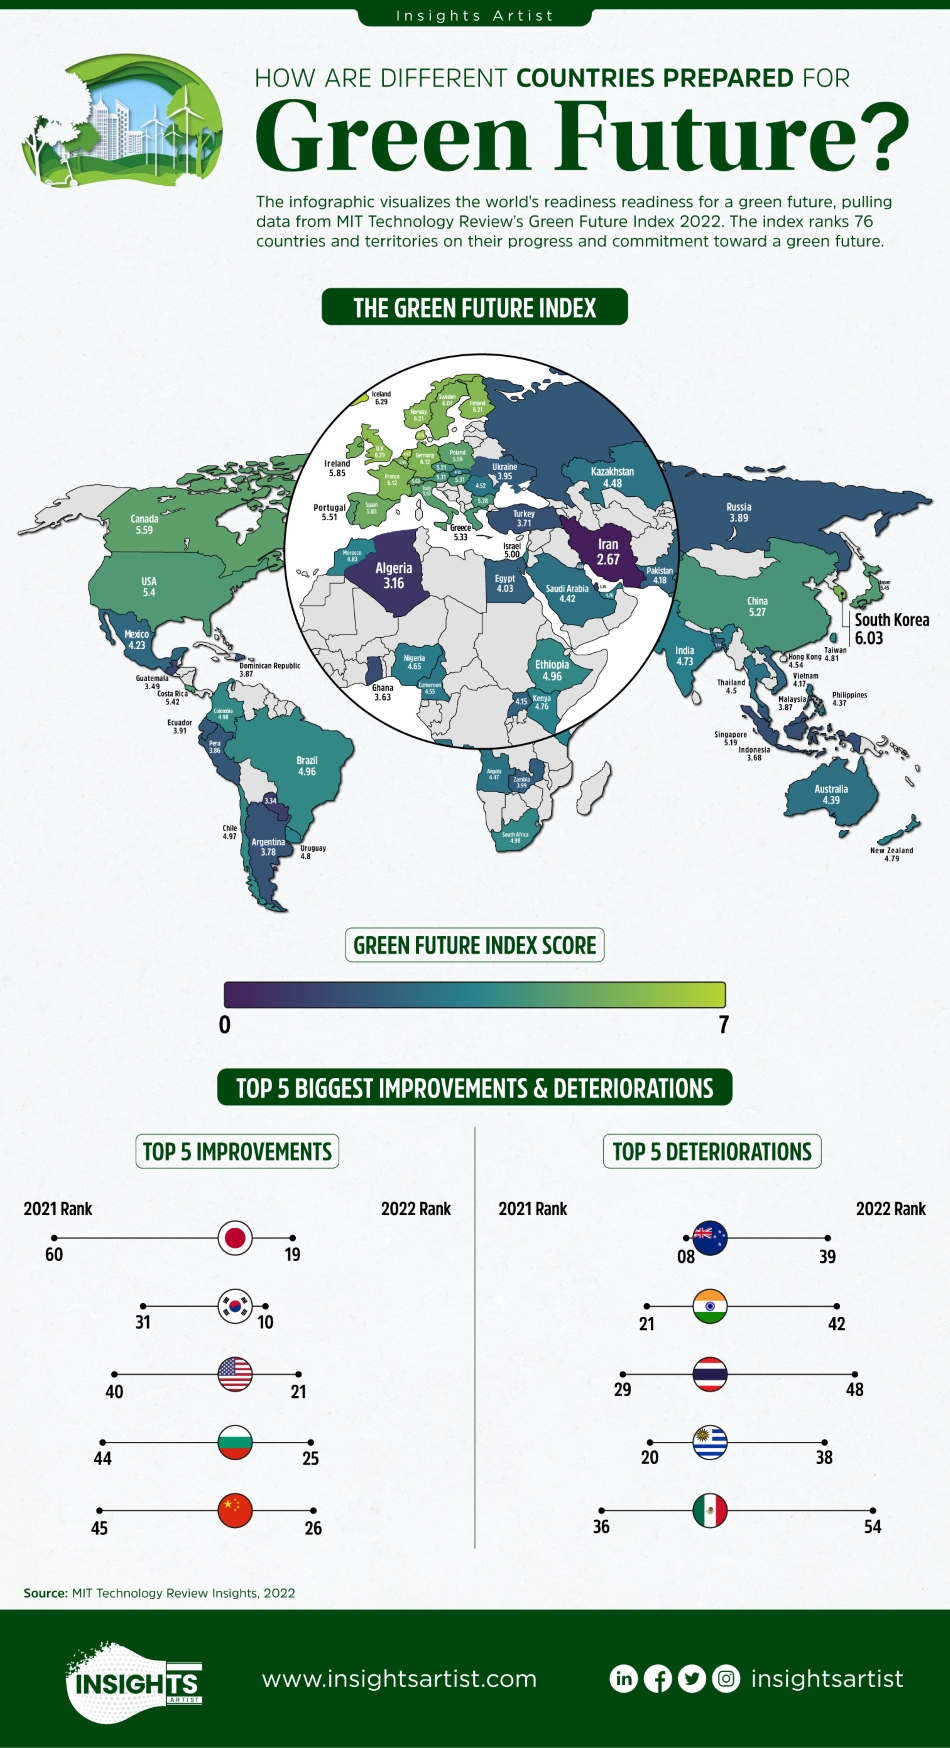 The Green Future Index